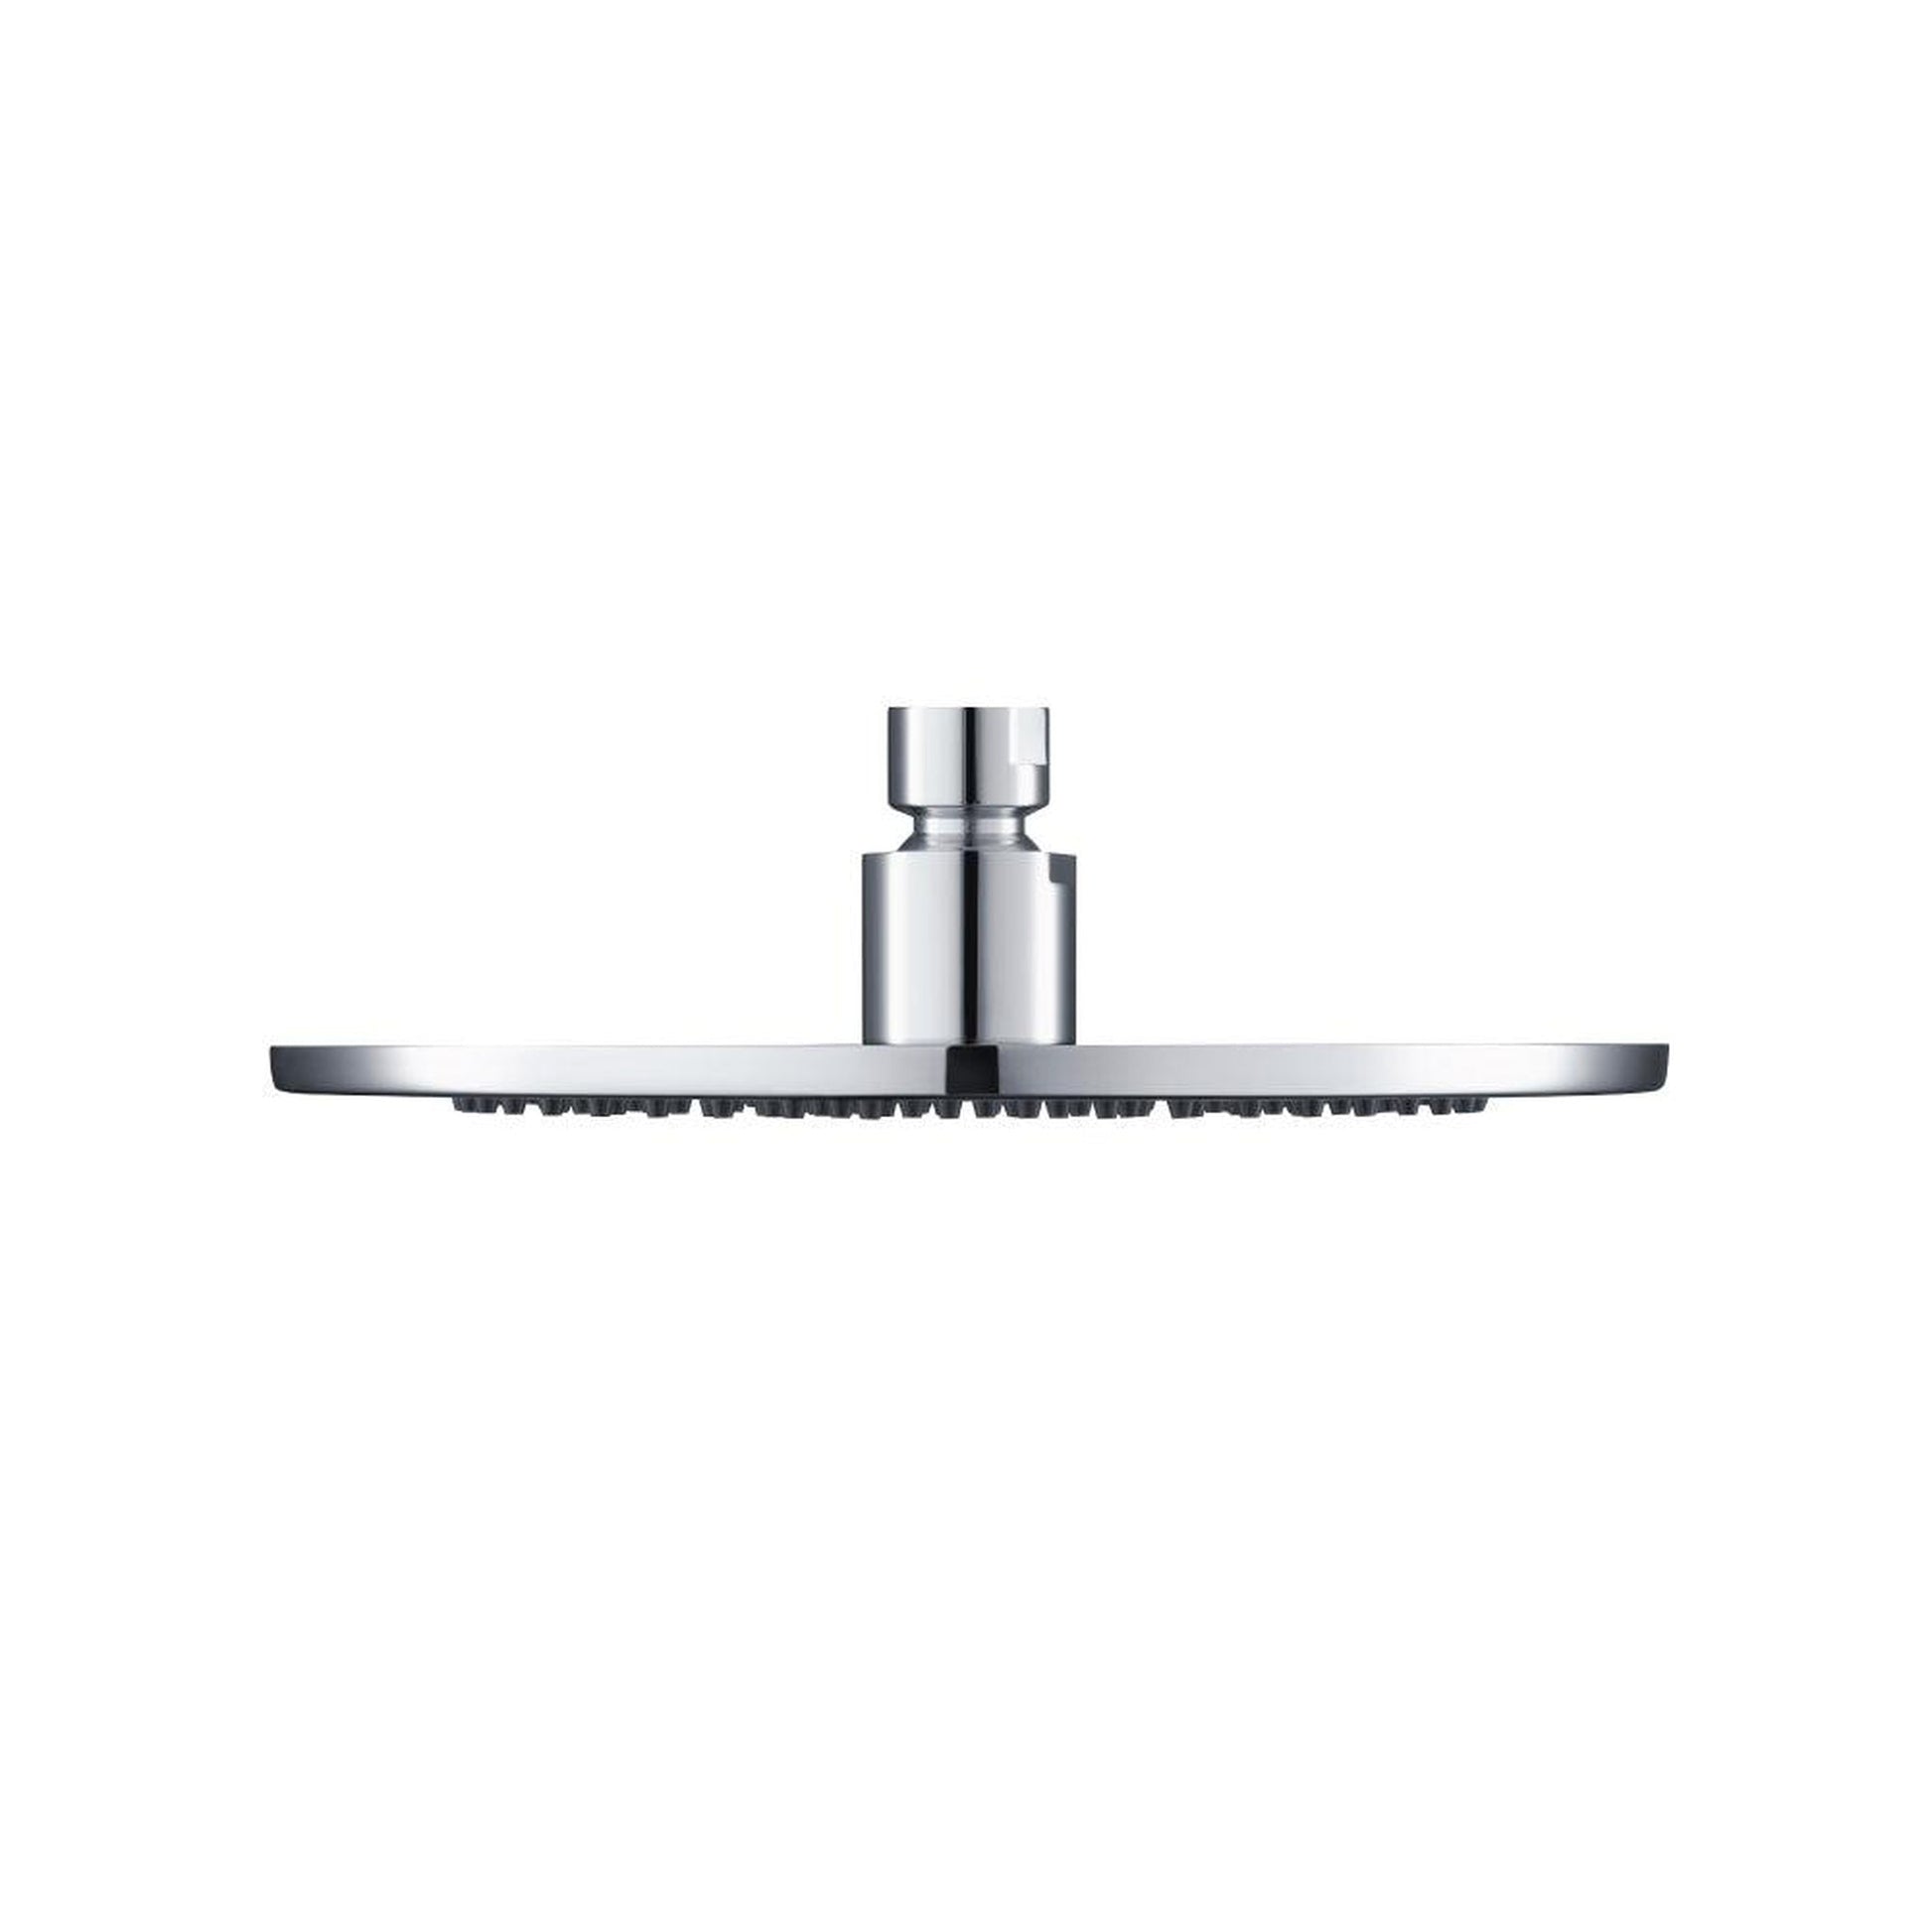 Isenberg Serie 250 Single Output Chrome Wall-Mounted Shower Set With Single Function Round Rain Shower Head, Two-Handle Shower Trim and 1-Output Wall-Mounted Thermostatic Shower Valve With Integrated Volume Control